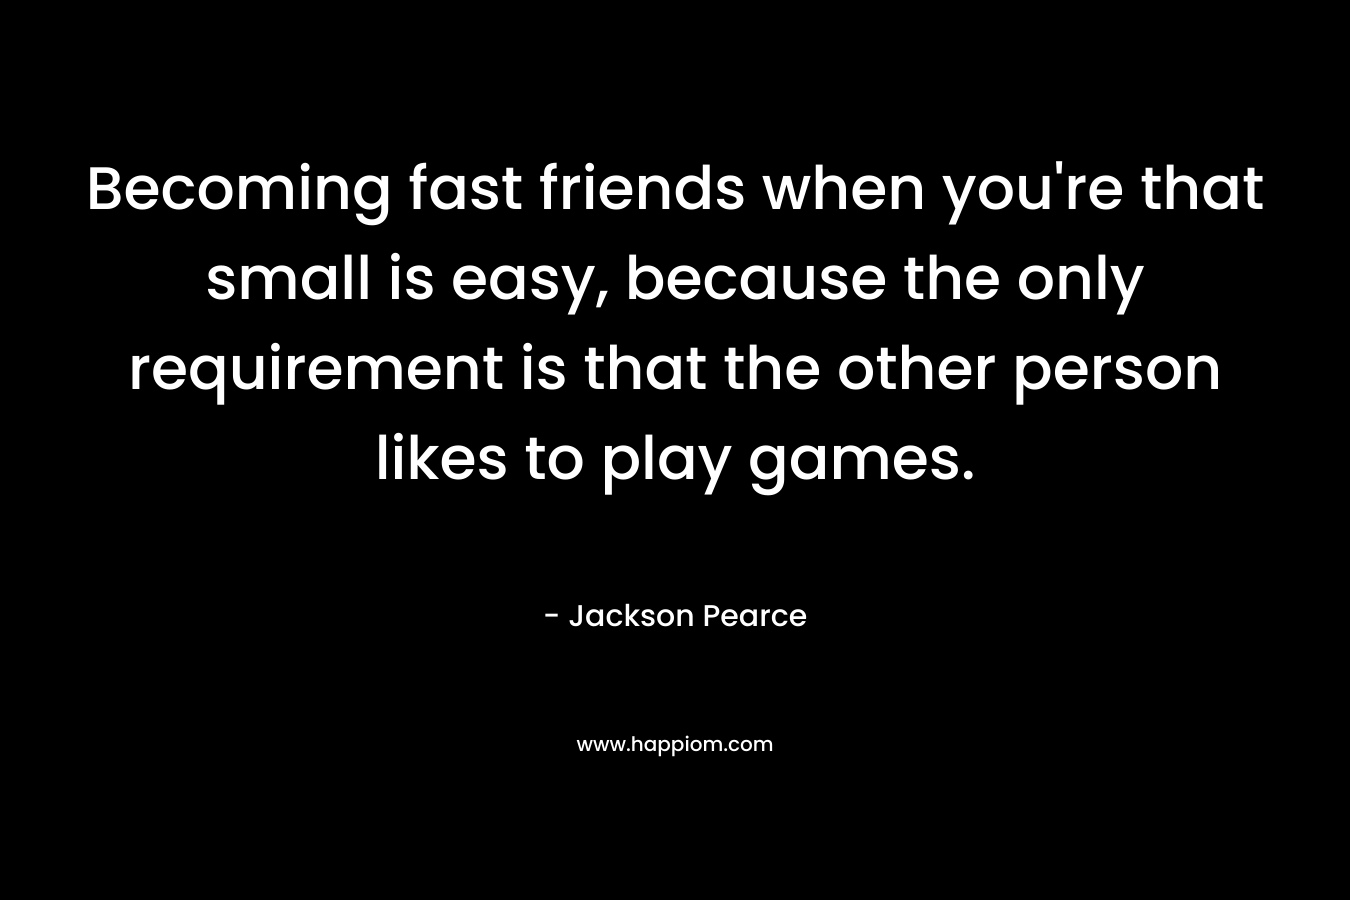 Becoming fast friends when you’re that small is easy, because the only requirement is that the other person likes to play games. – Jackson Pearce